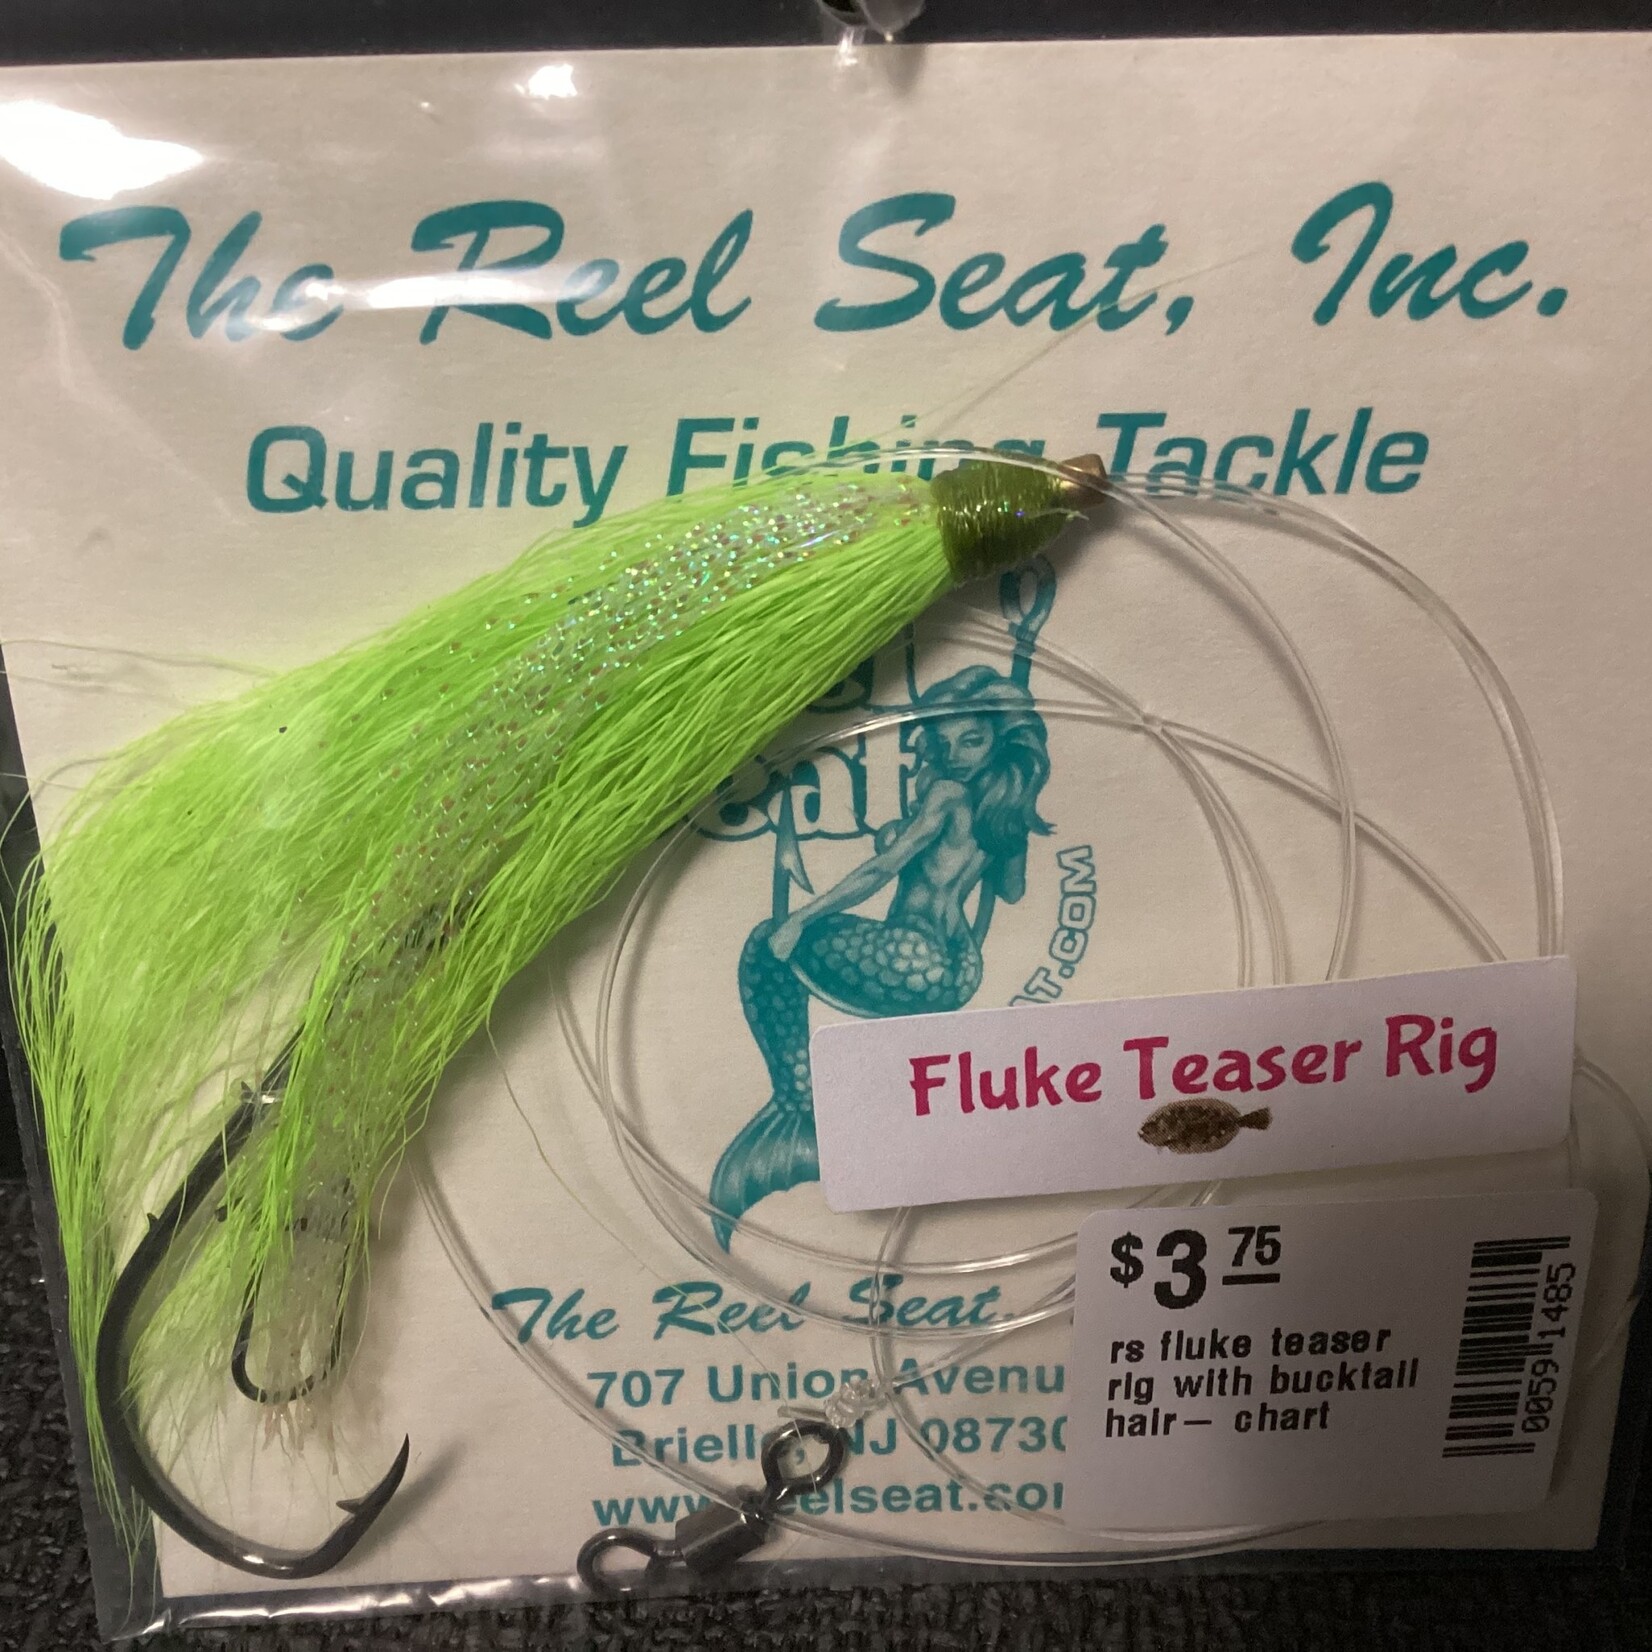 The Reel Seat RS fluke teaser rig with bucktail hair- chart